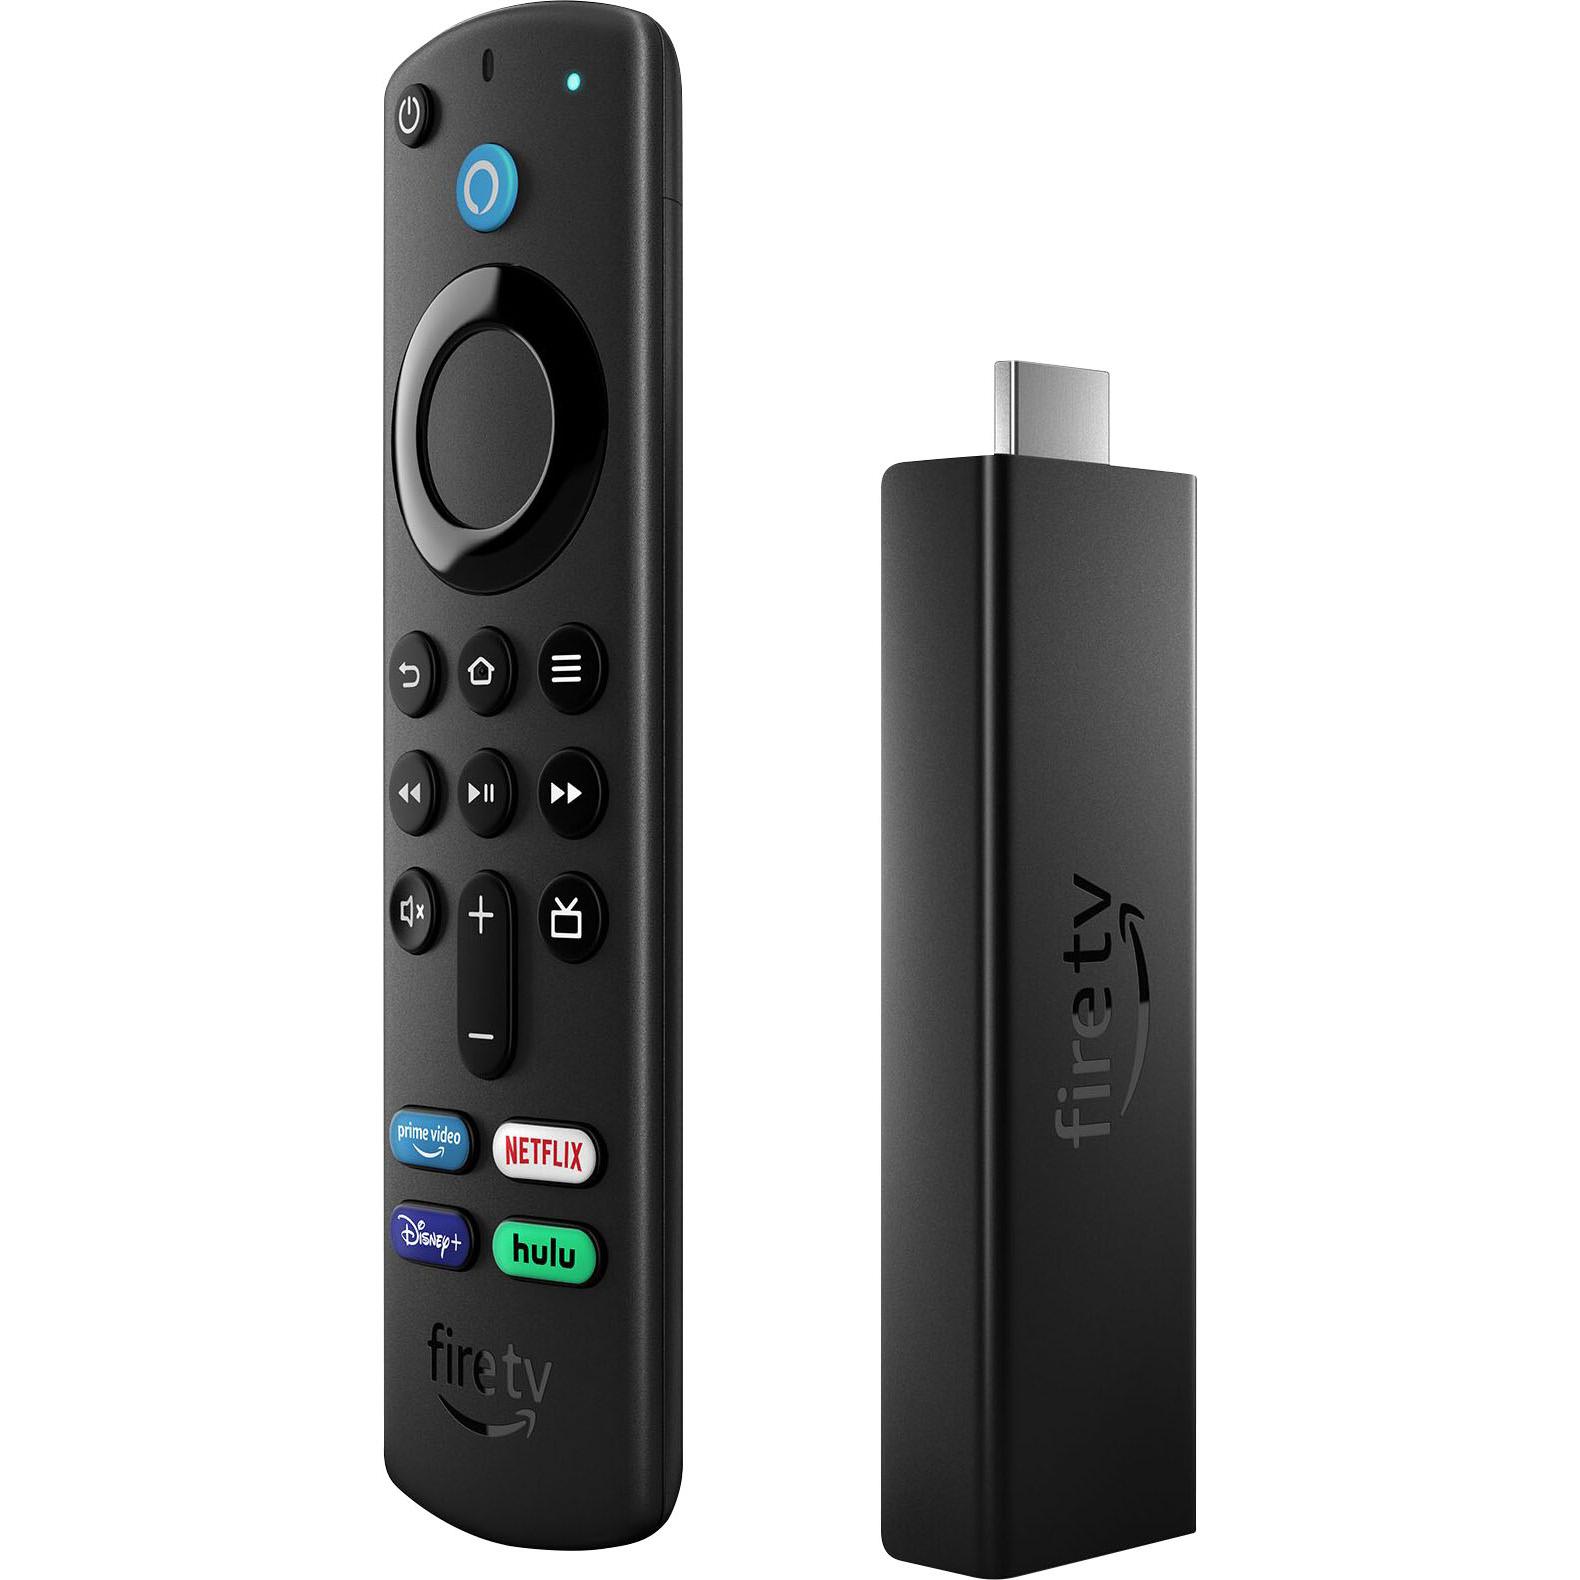 Amazon Fire TV Stick 4K Max Streaming Device for $24.99 Shipped